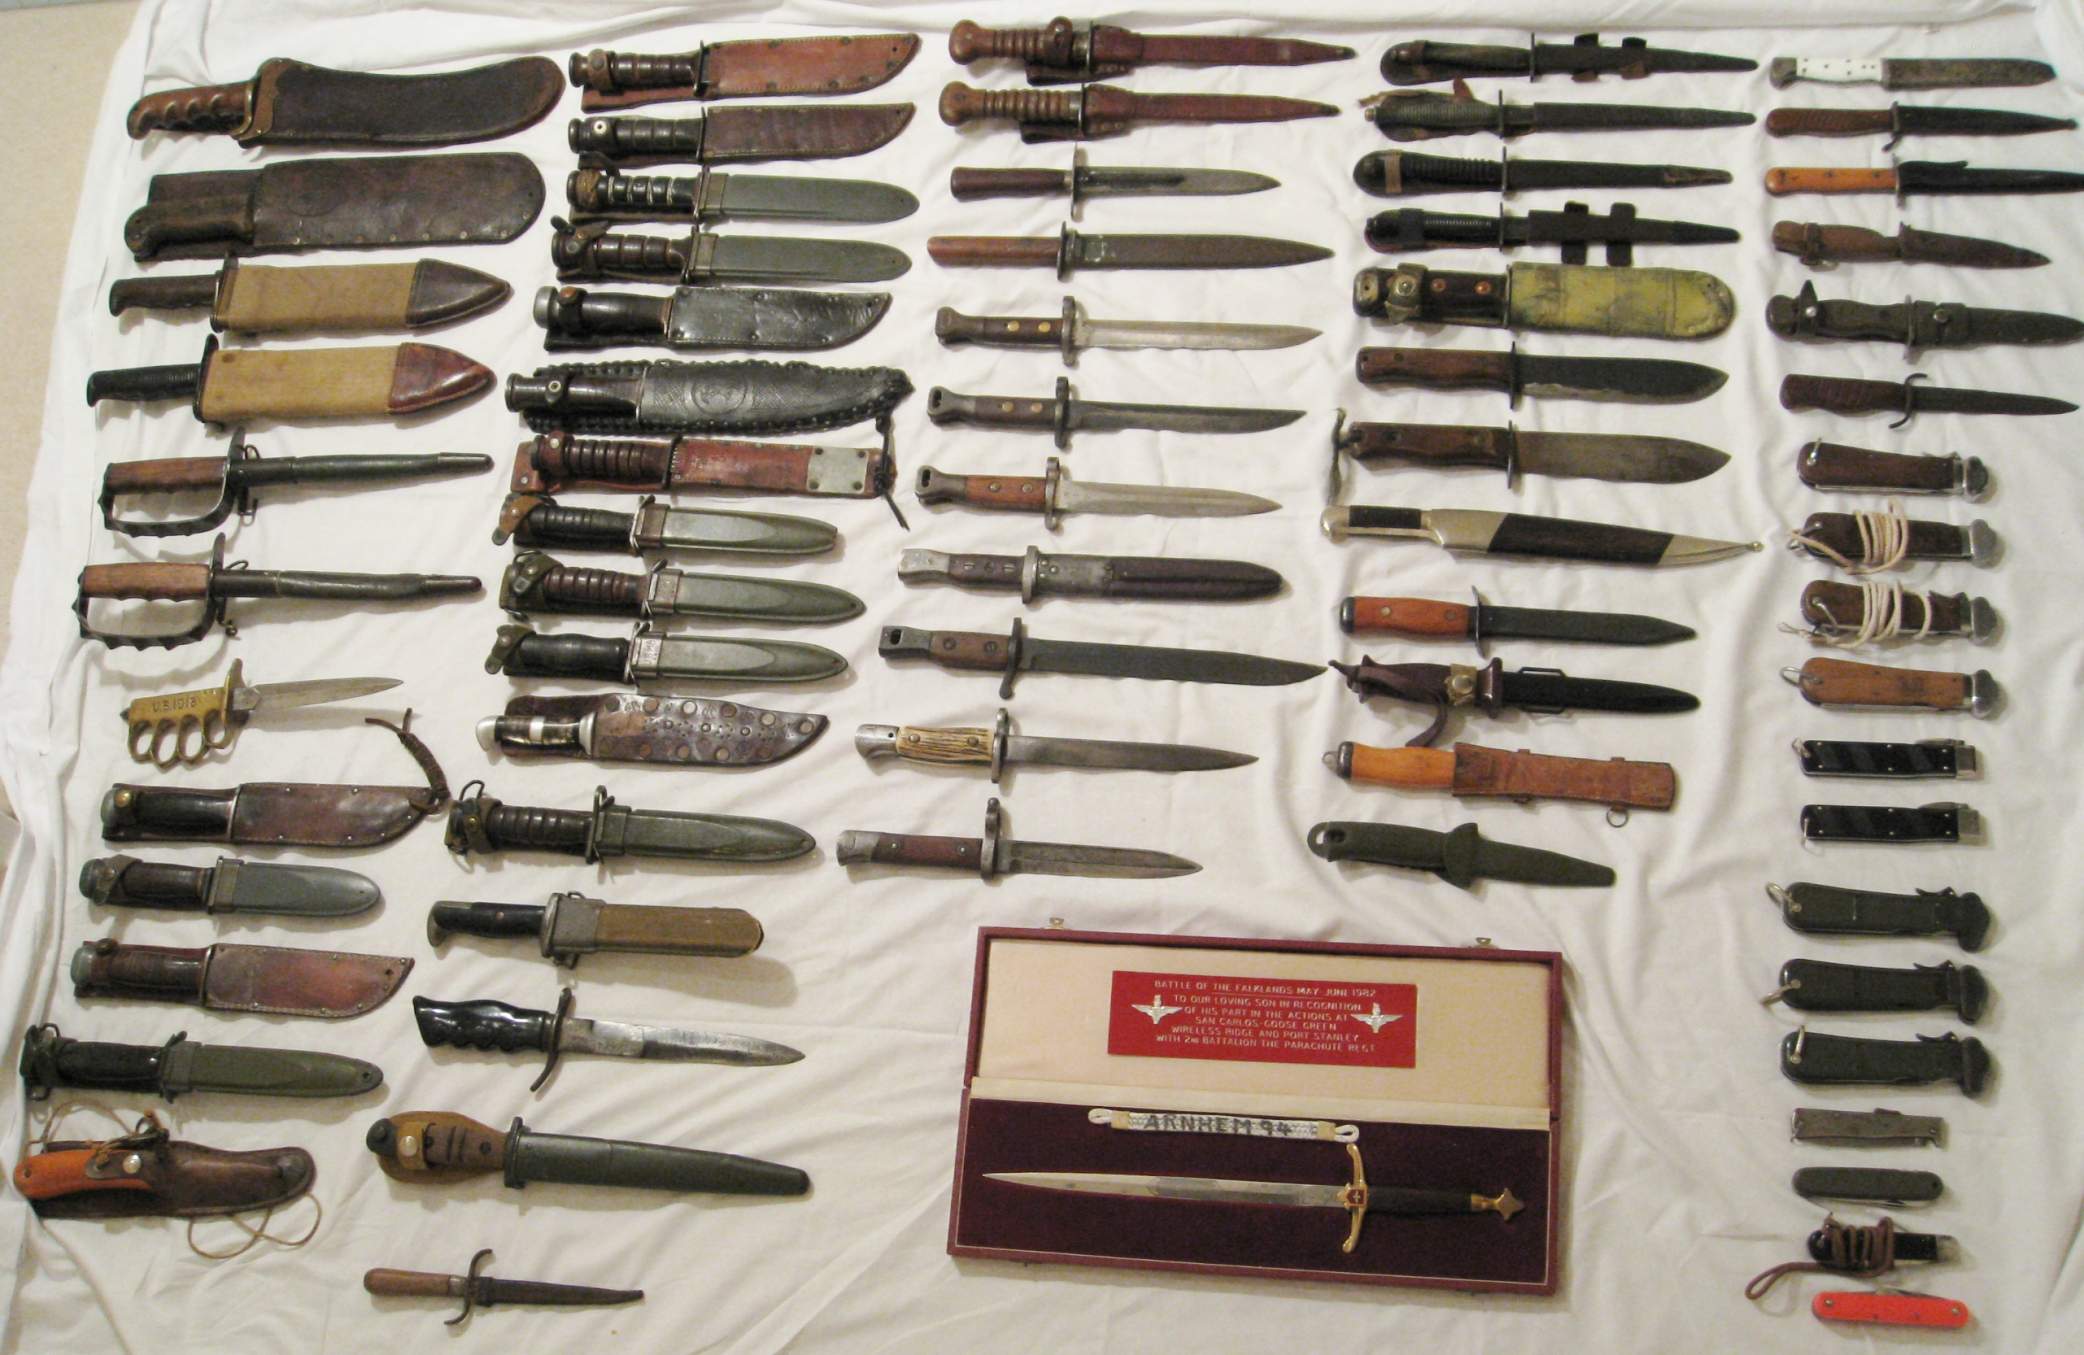 https://www.warrelics.eu/forum/attachments/bayonets-trench-knives-world/171146d1295224960-my-knife-collection-281.jpg